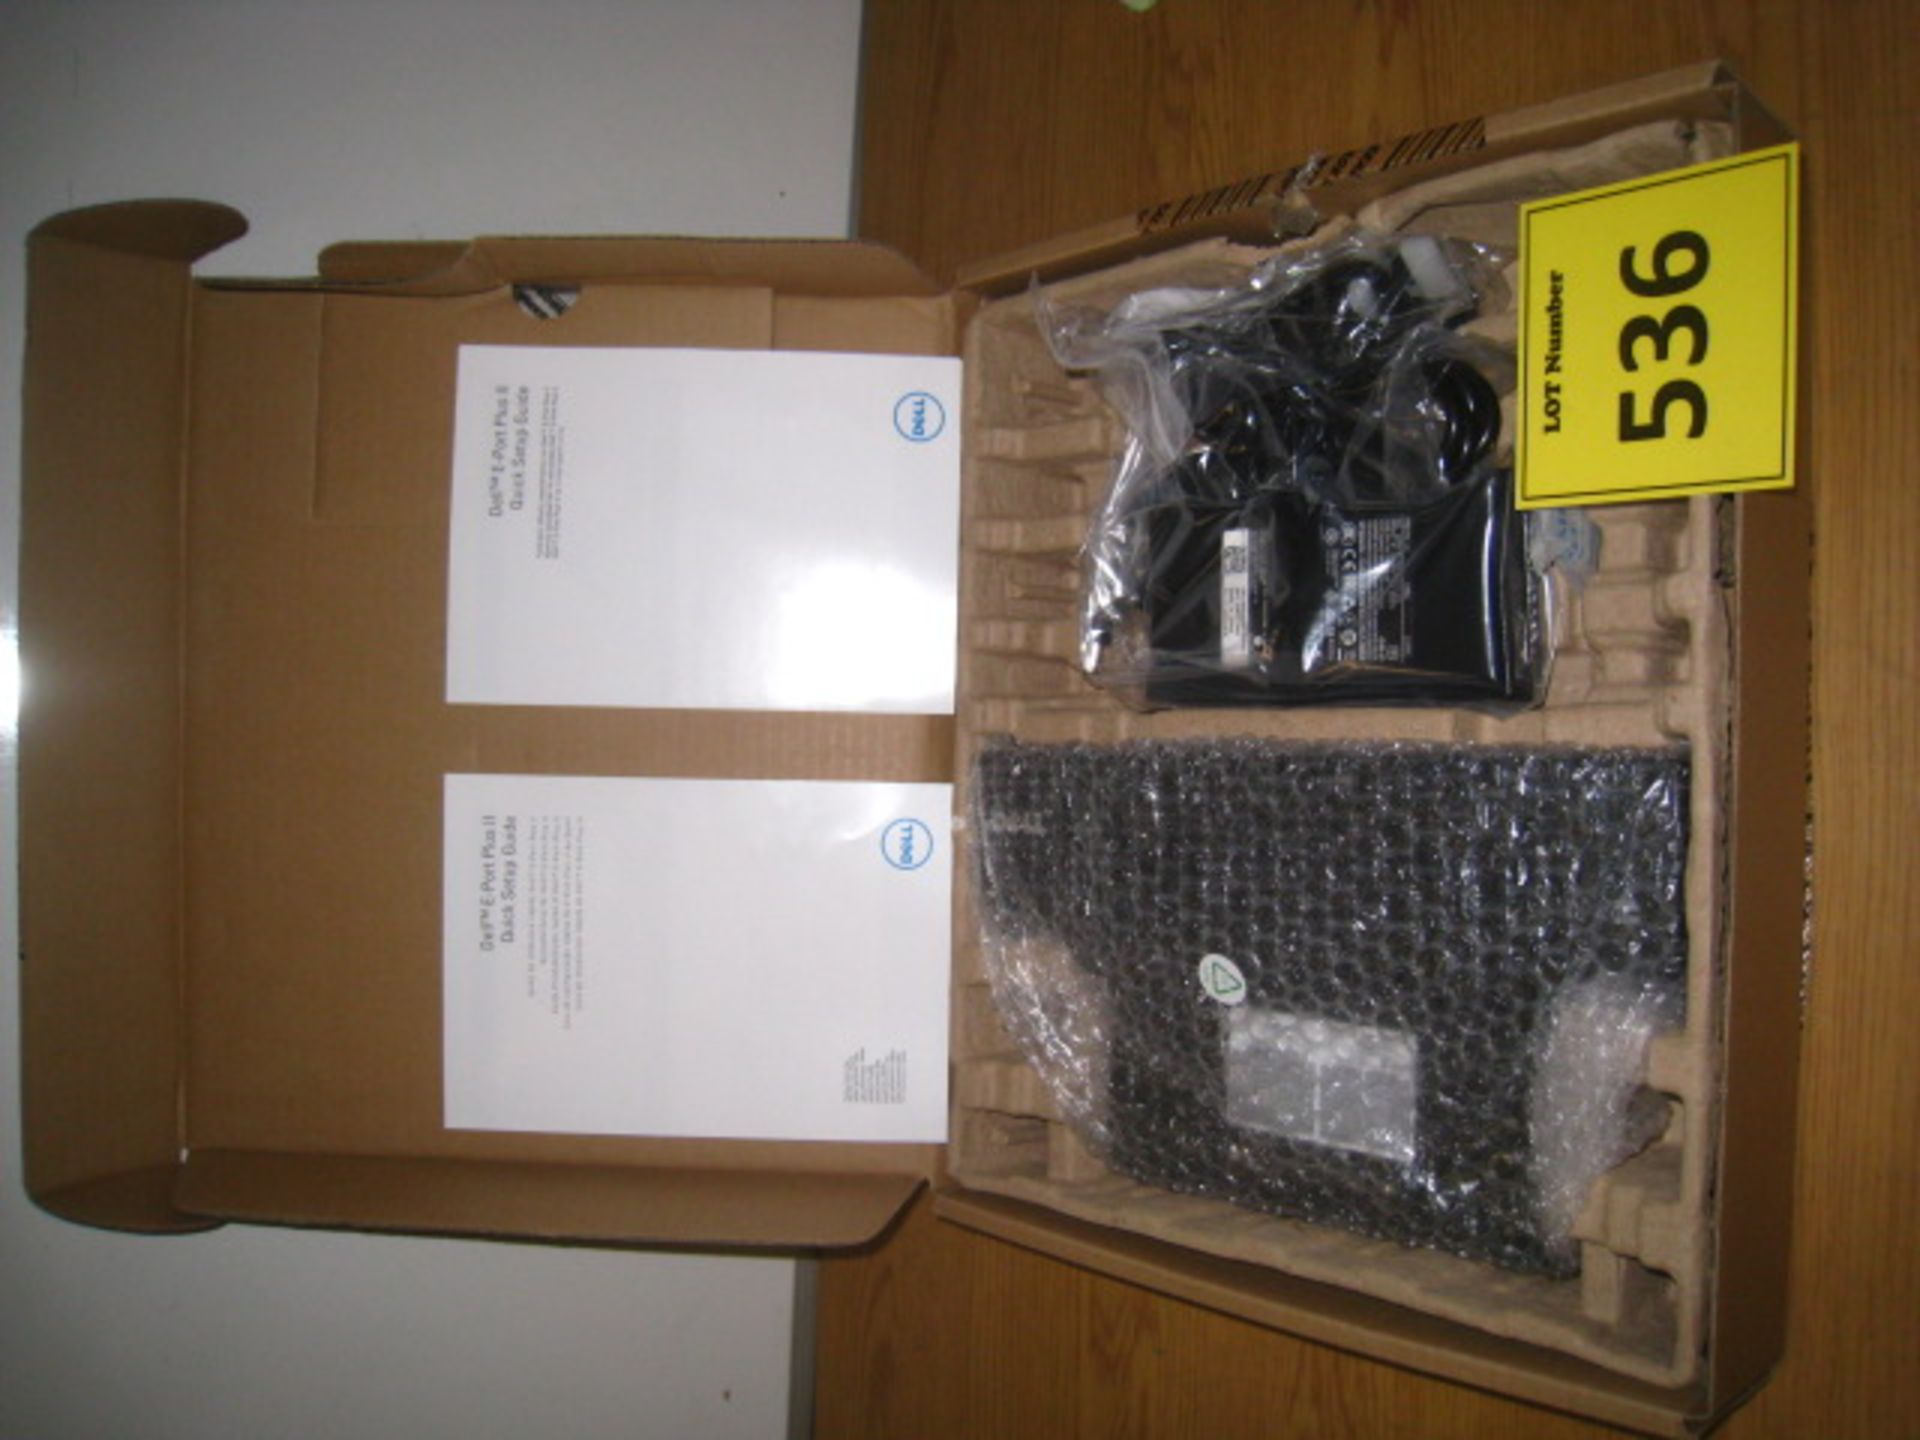 NEW & BOXED Dell Advanced USB 3.0 Laptop Docking Station Includes 130W Power Supply 0N1J67 - Image 2 of 2